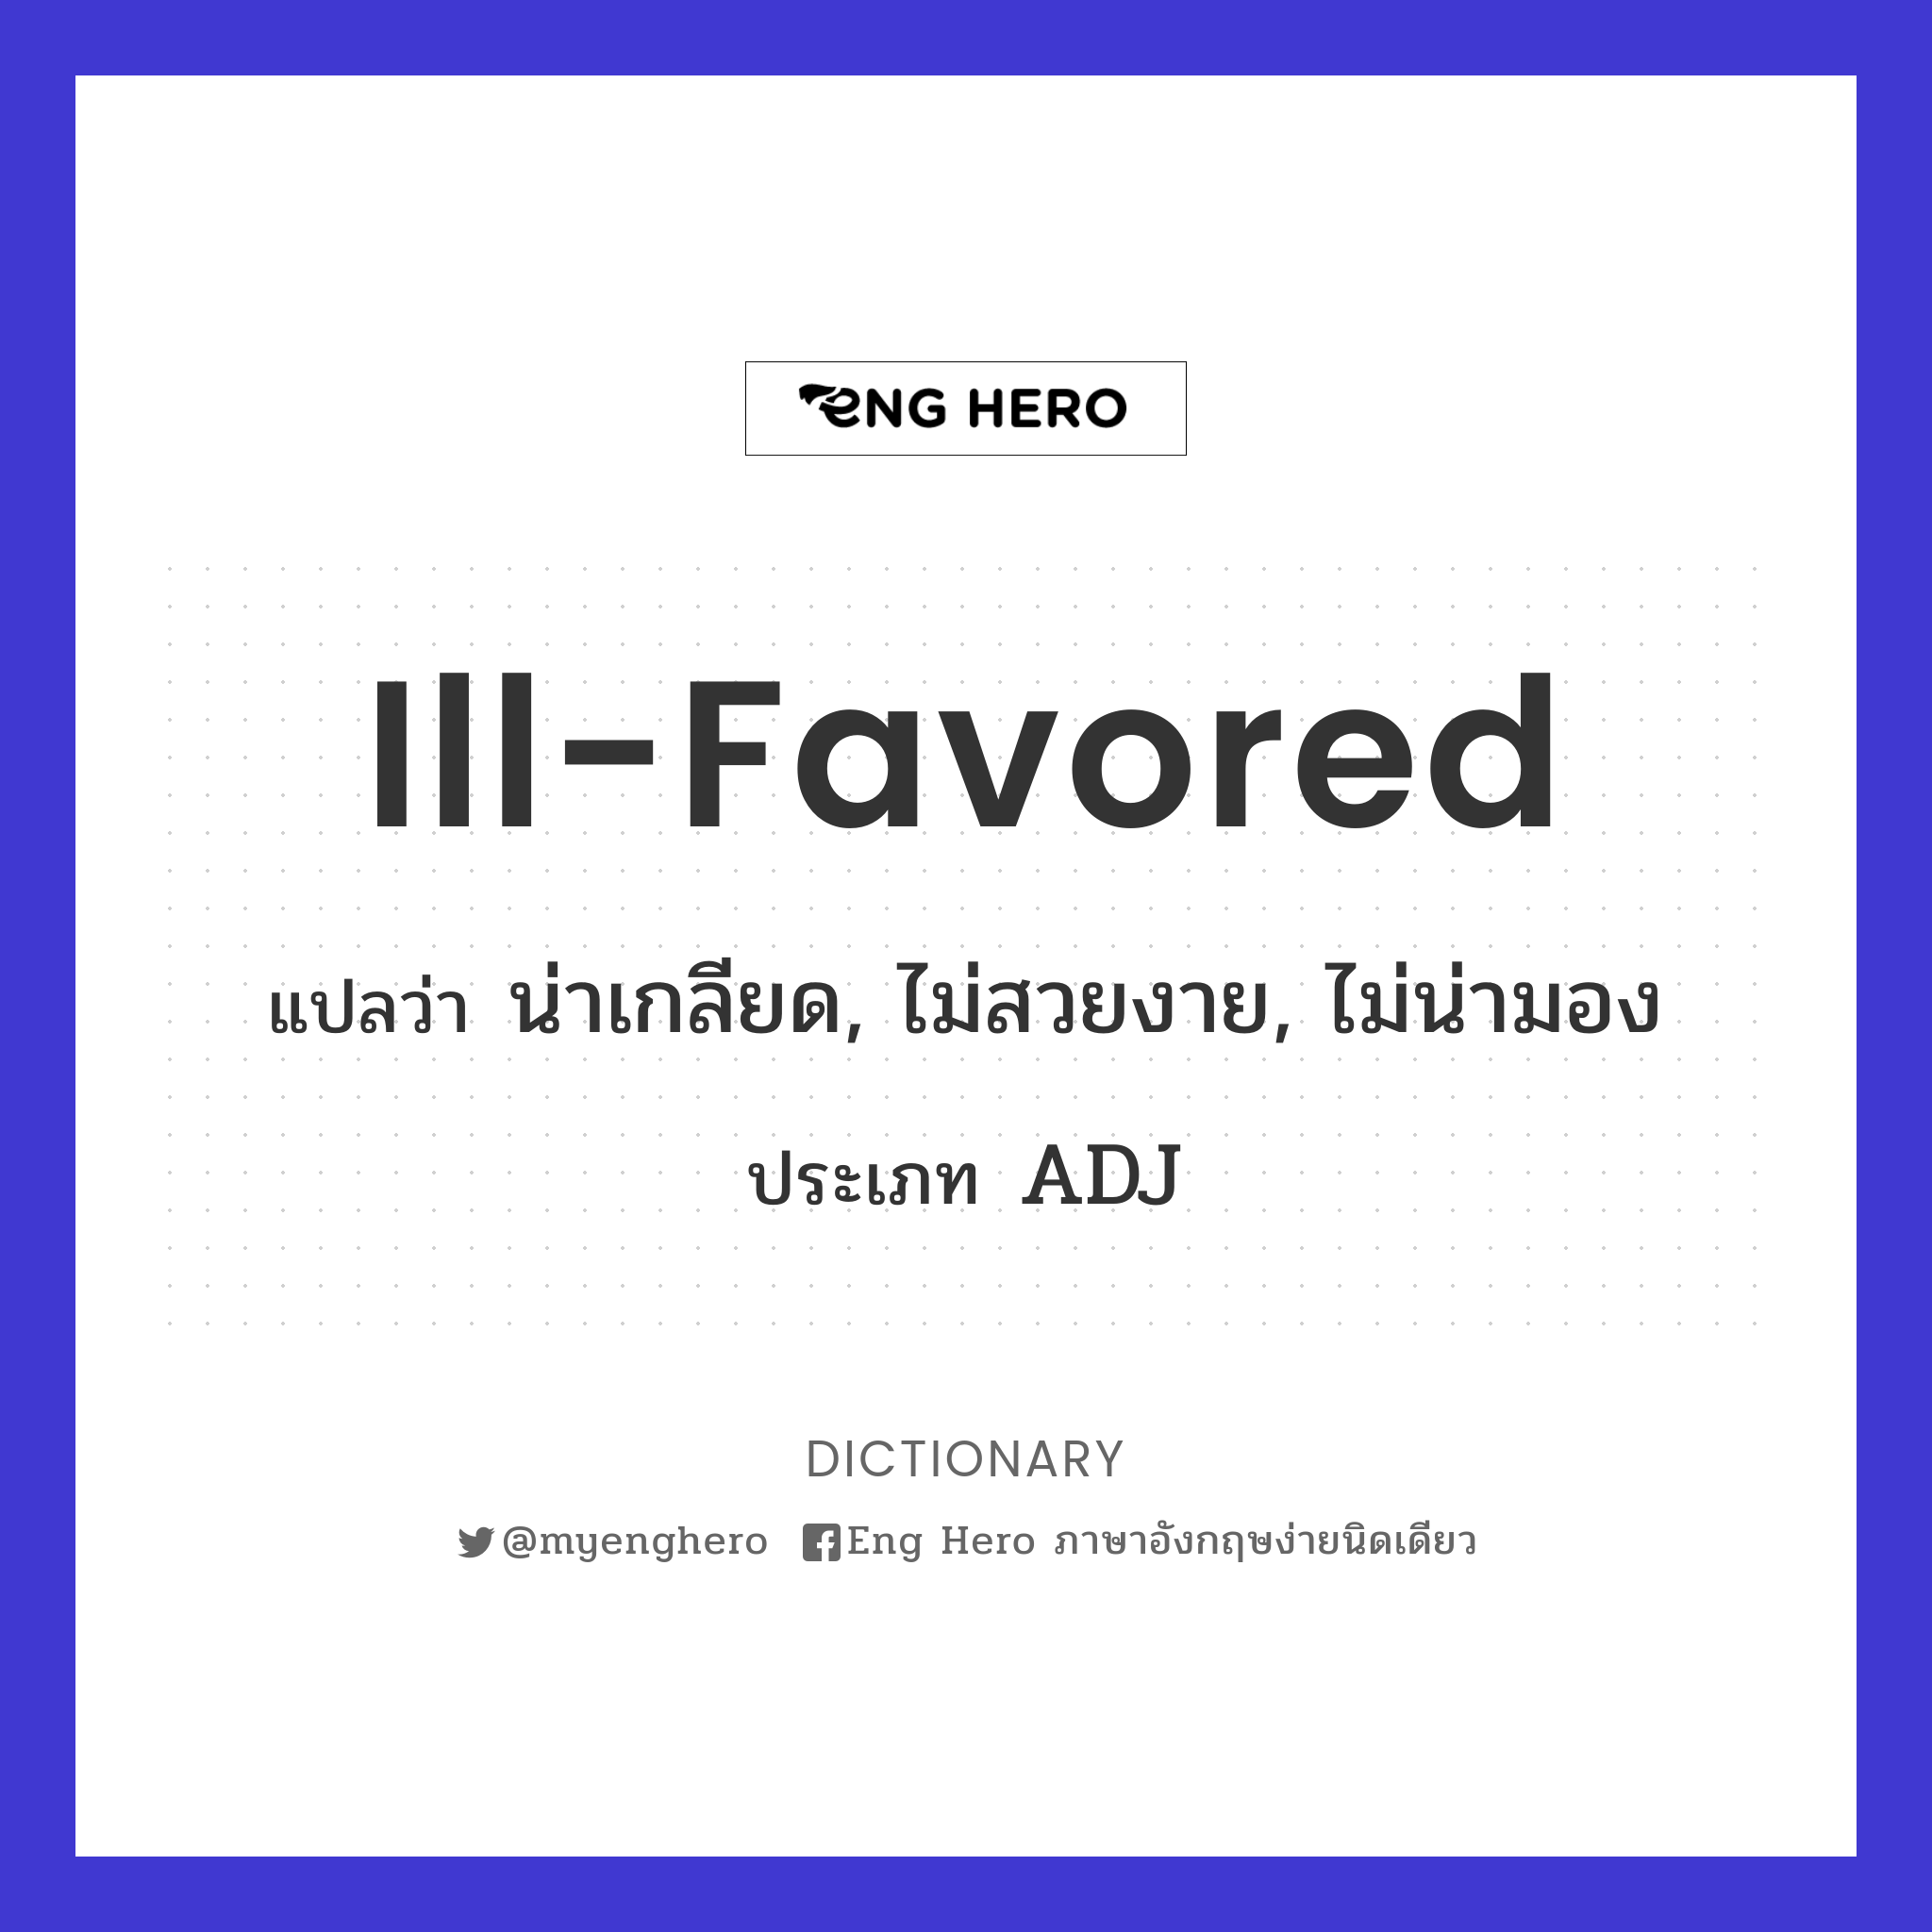 ill-favored